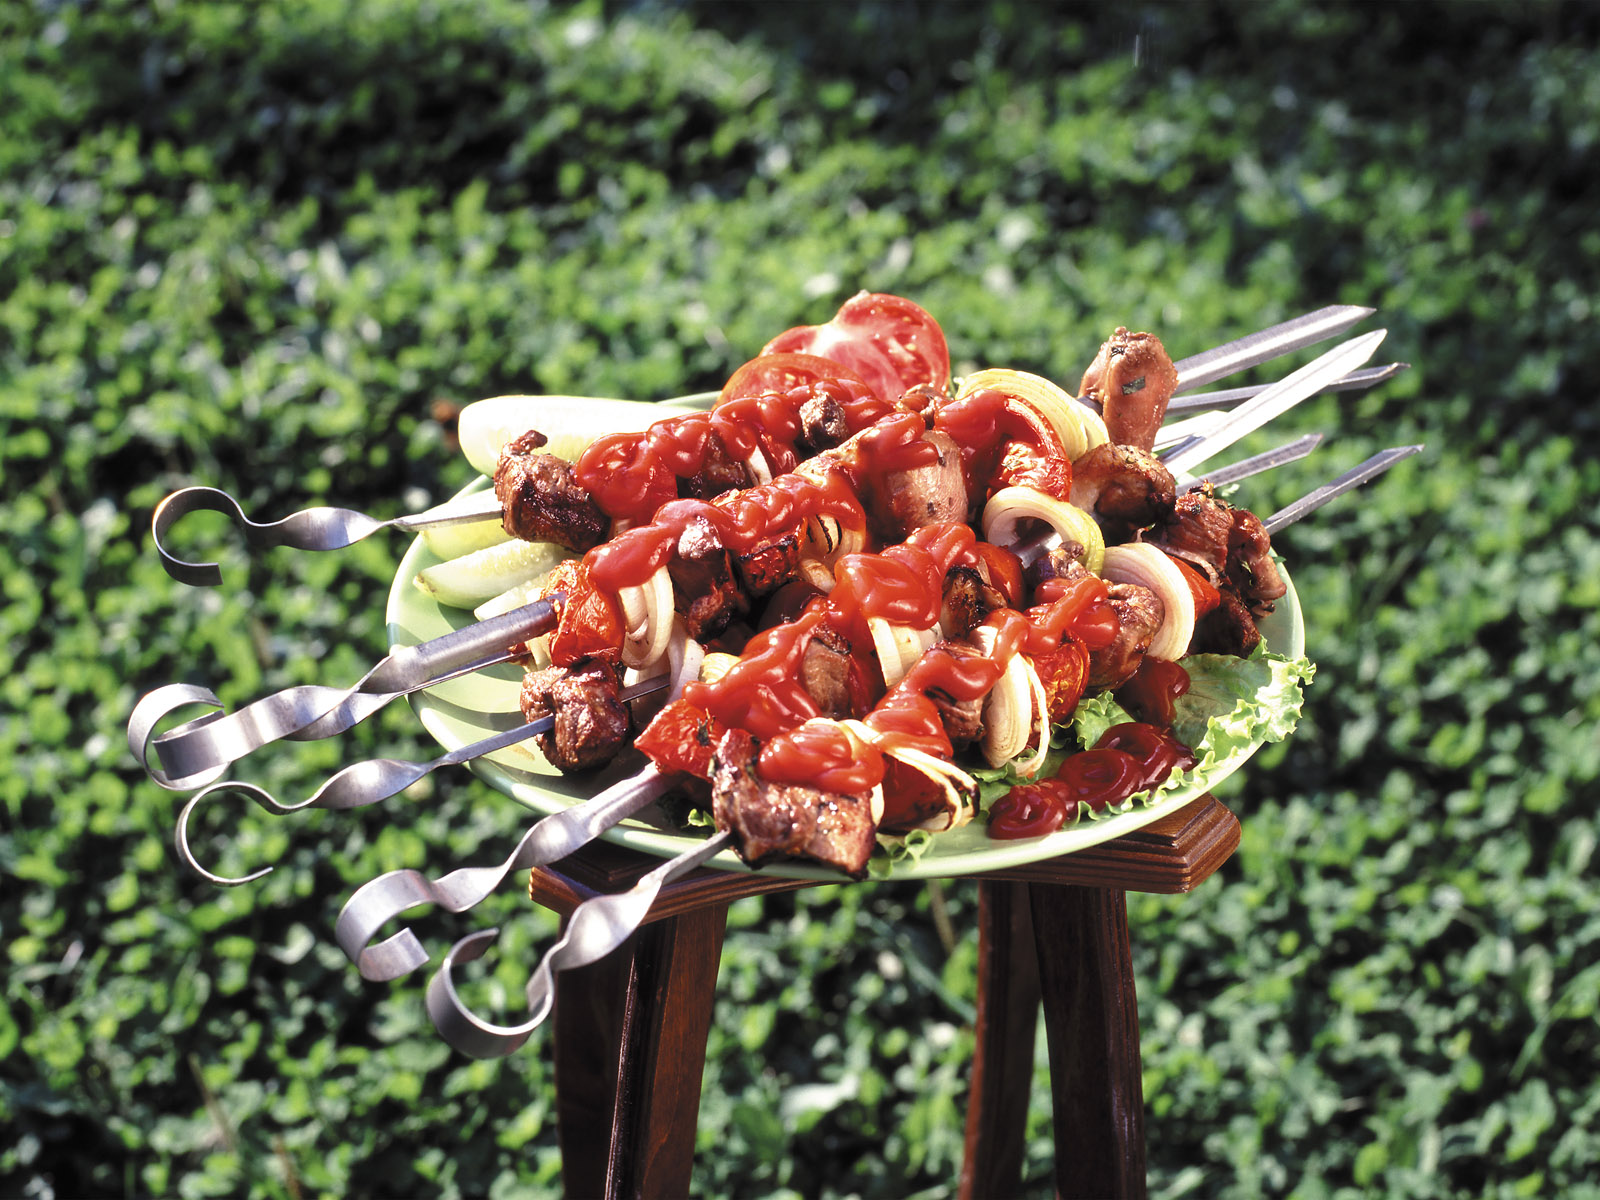 http://www.zastavki.com/pictures/1600x1200/2009/Food_Meat__barbecue_Dish_with_barbecue_skewers_011898_.jpg